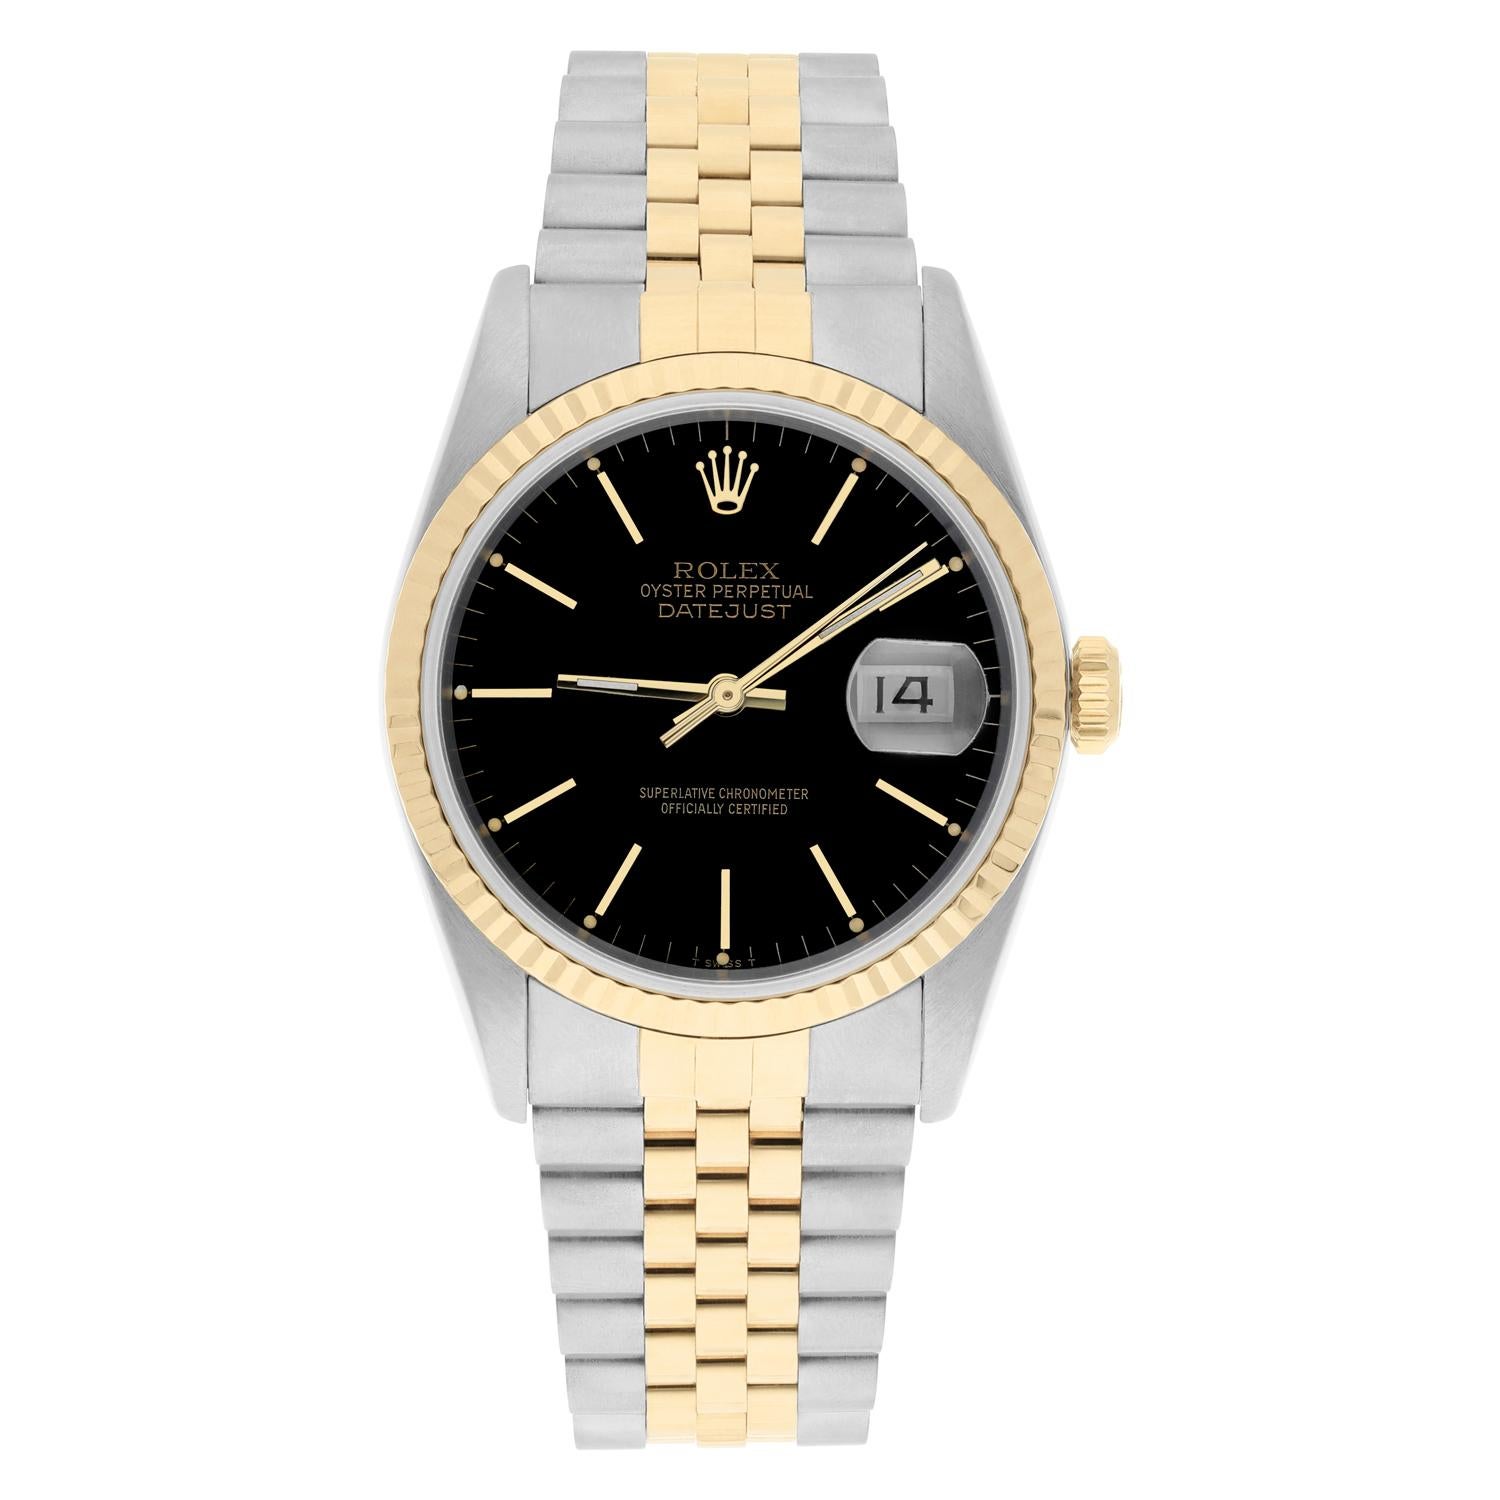 This watch has been professionally polished, serviced and is in excellent overall condition. There are absolutely no visible scratches or blemishes. Model features quick-set movement. Authenticity guaranteed! The sale comes with a new style Rolex